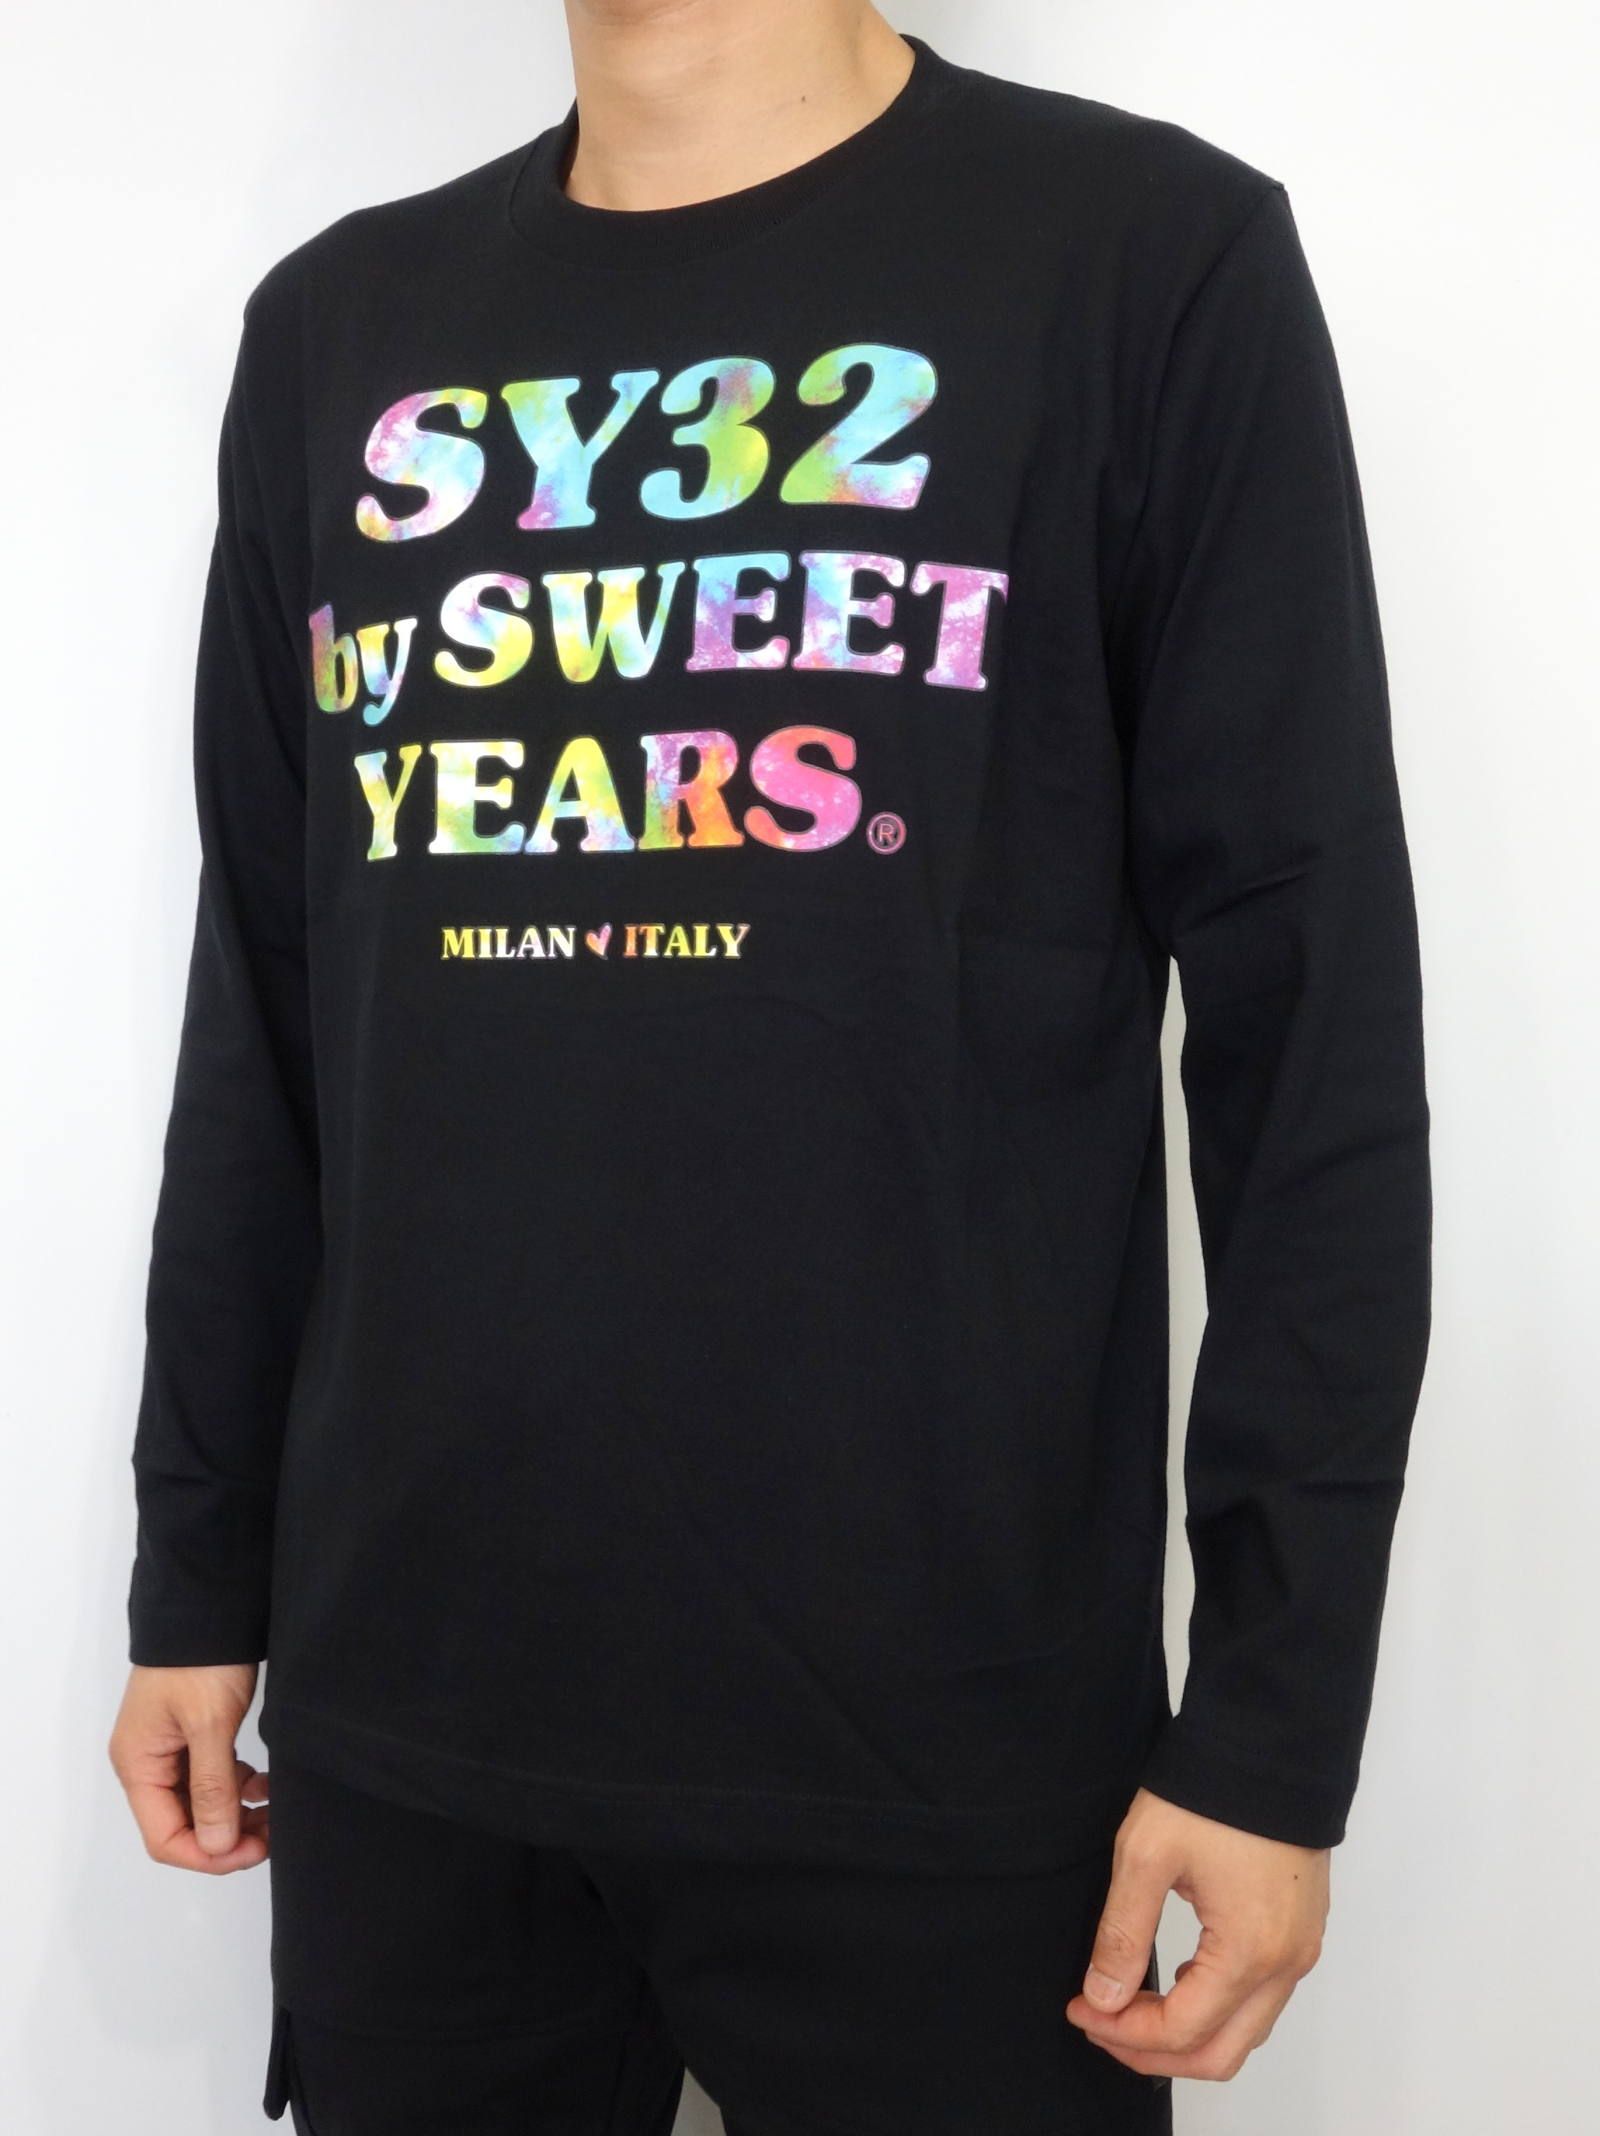 SY32 by SWEET YEARS - TIE DYE GRAPHIC L/S TEE / 9126T 